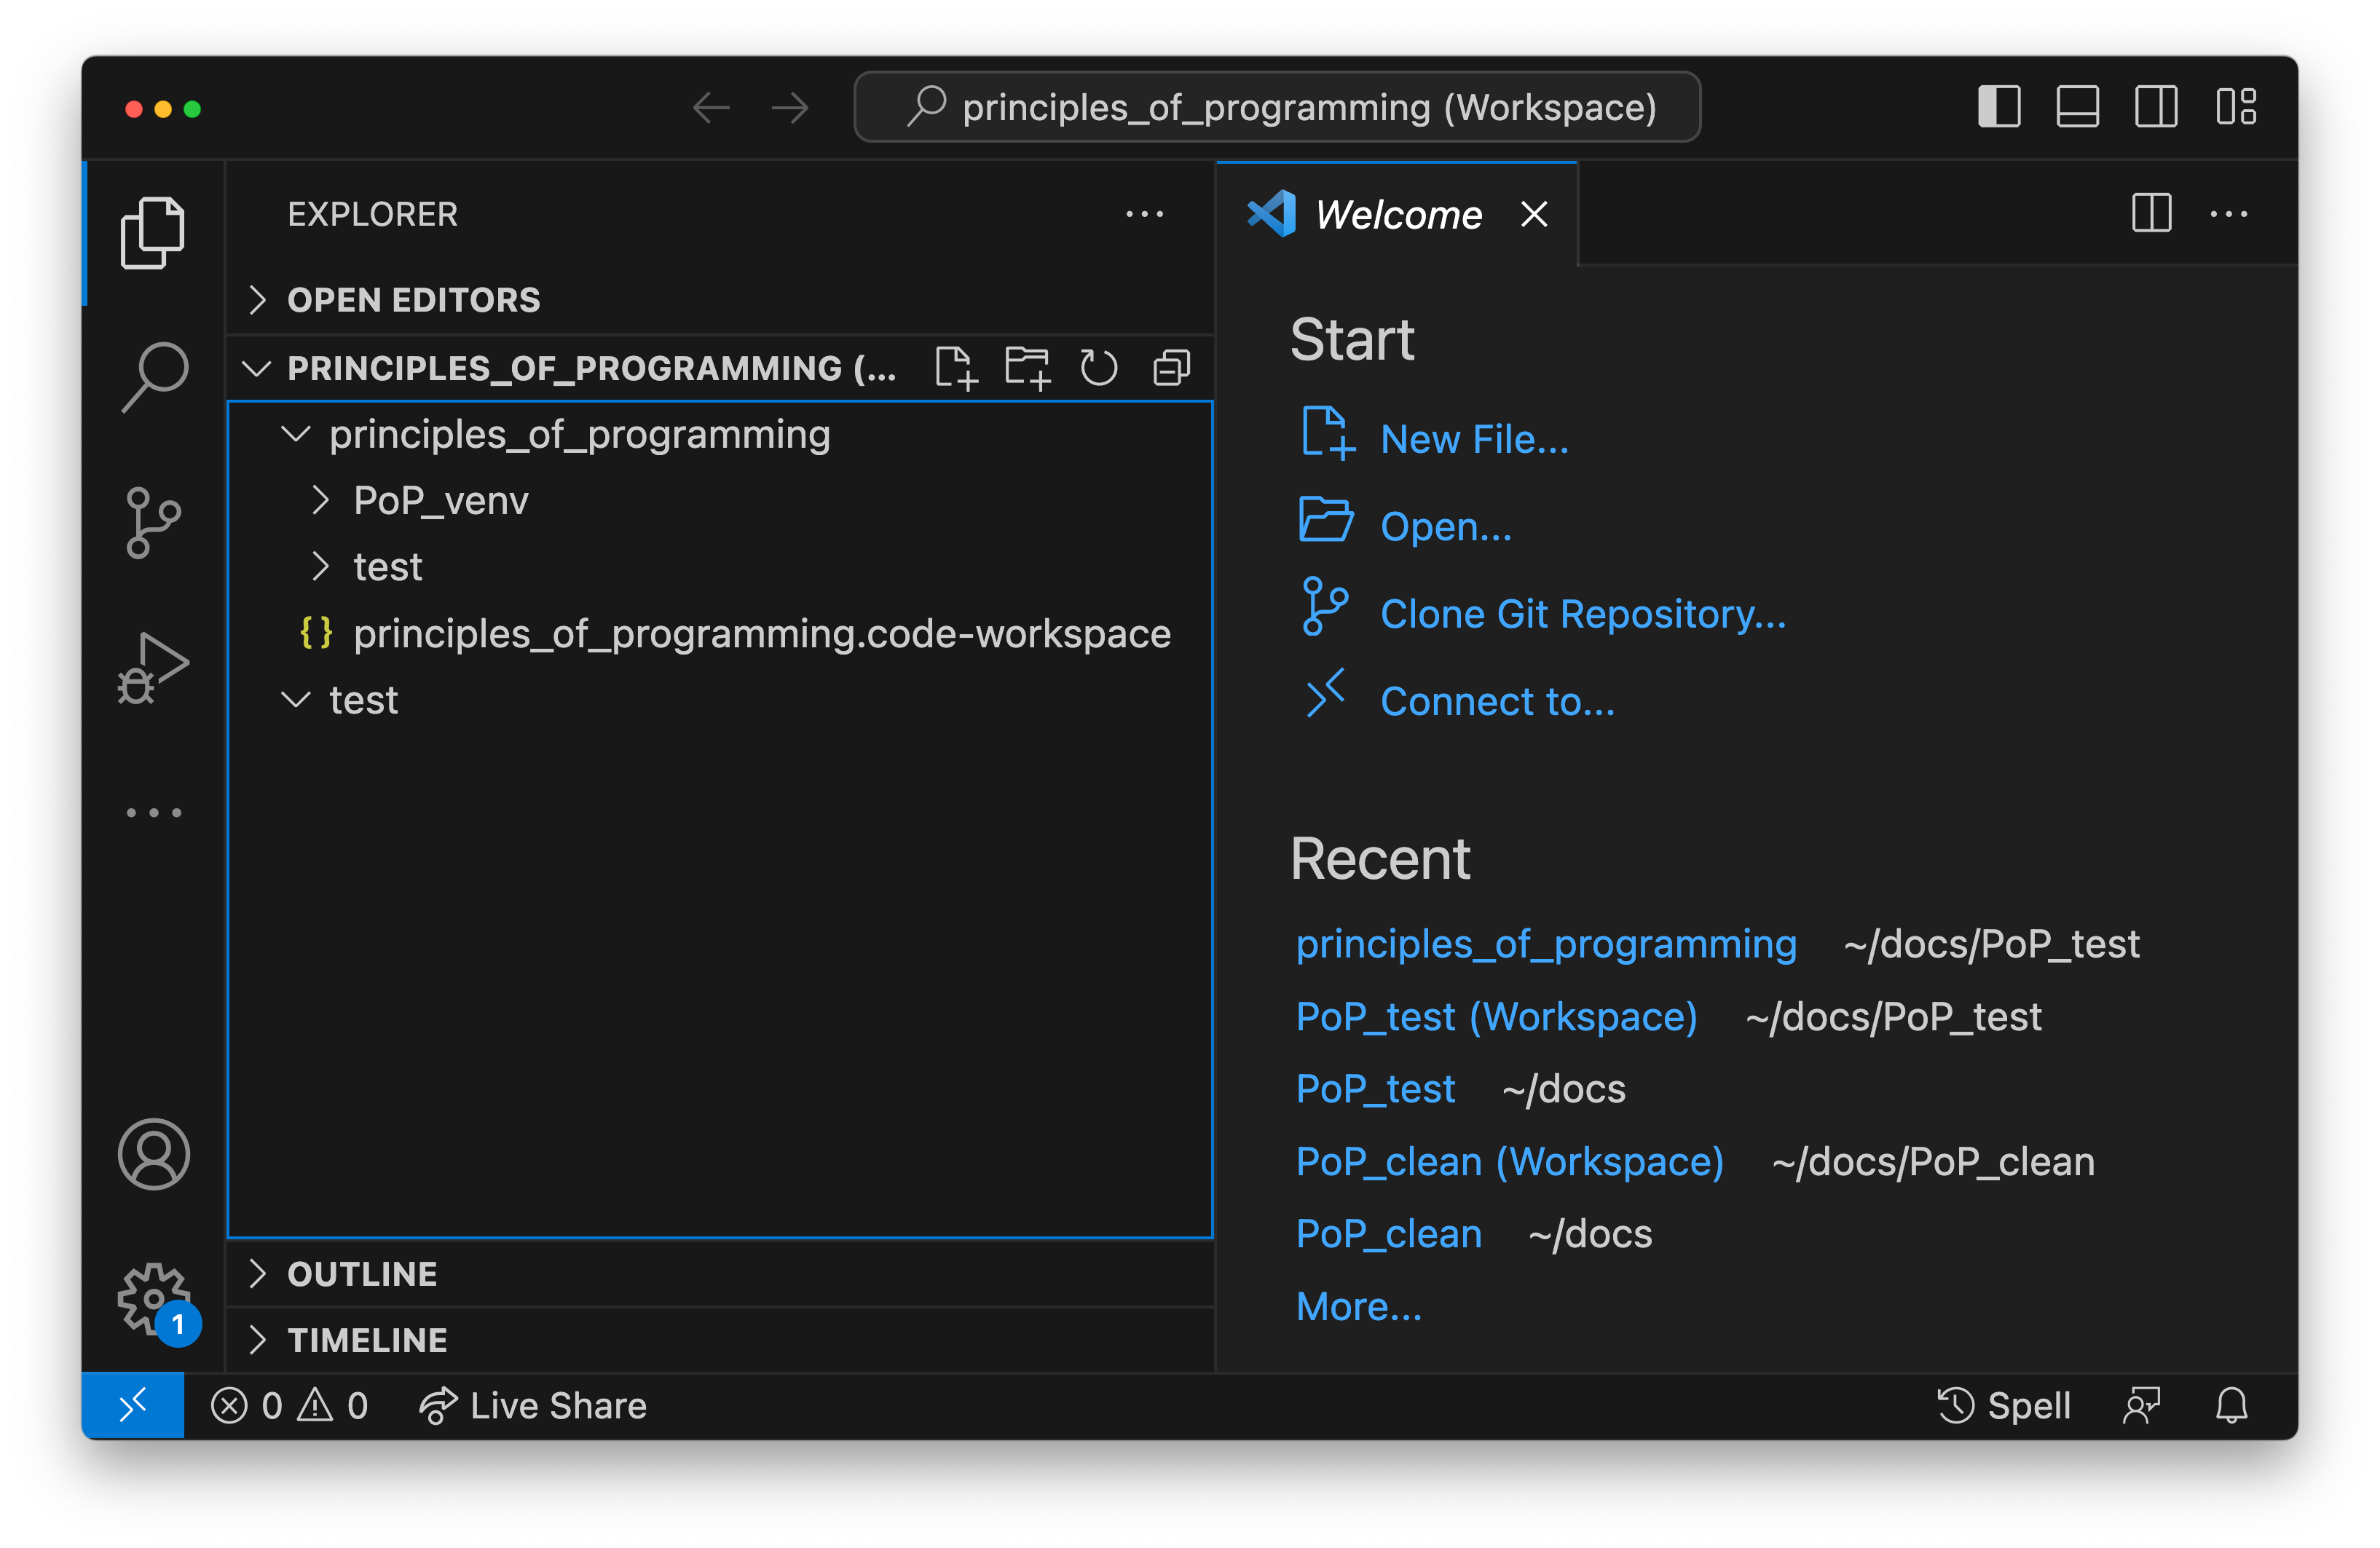 _images/vscode_workspace.png